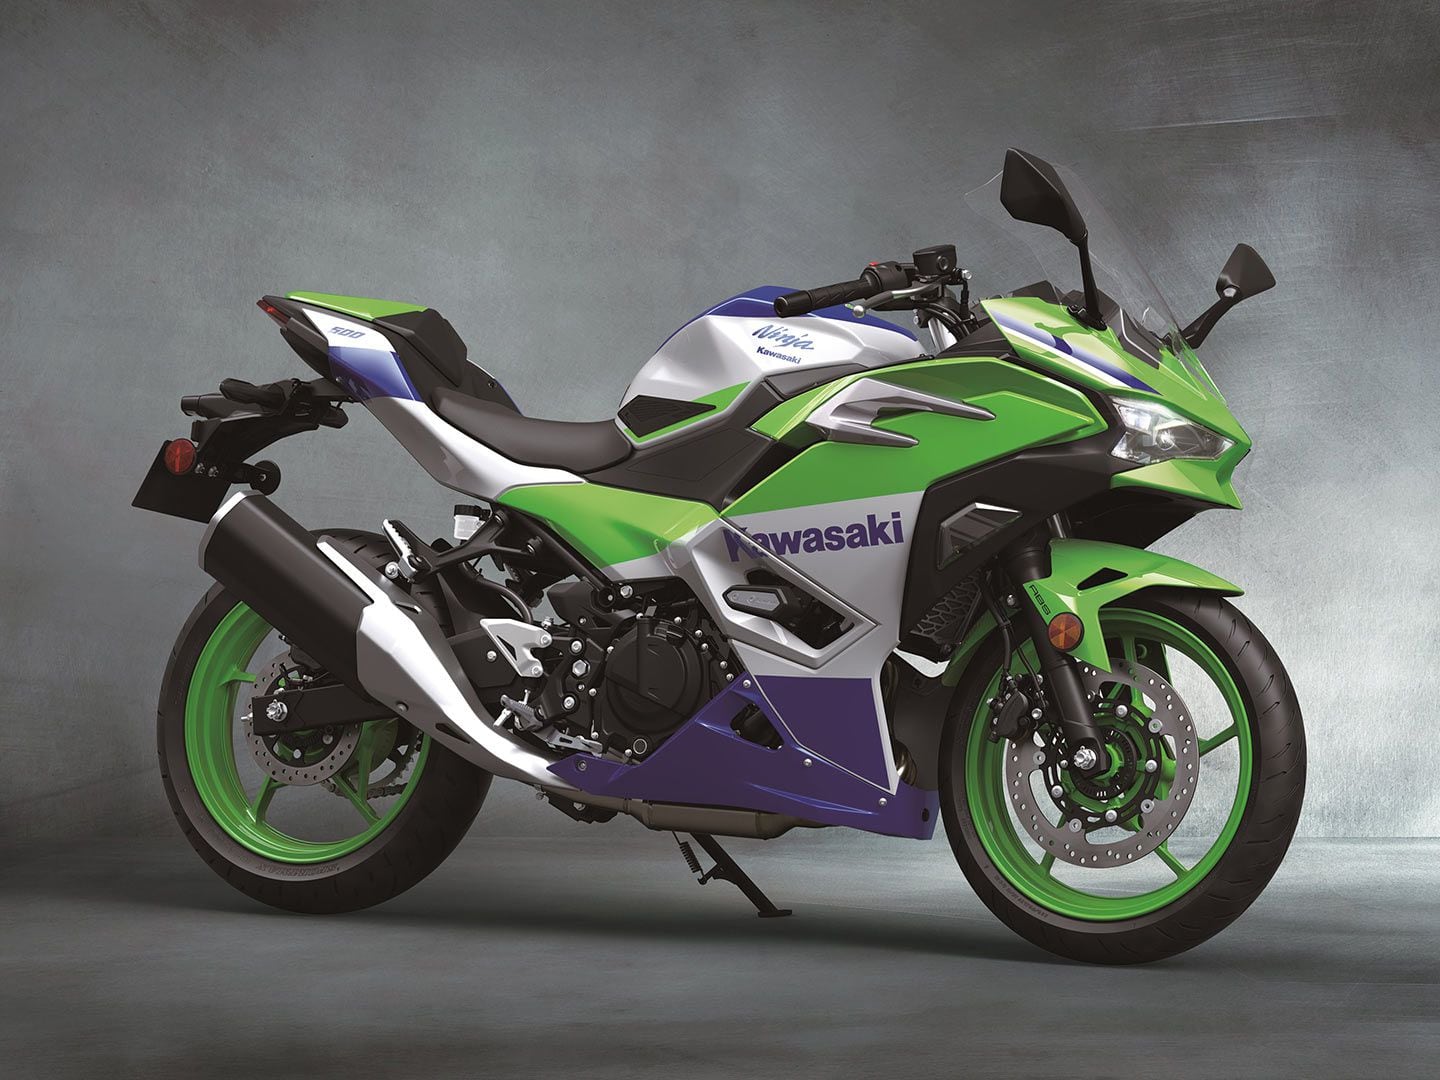 The 40th anniversary edition celebrates 40 years of Ninja motorcycles…with a paint scheme reminiscent of a mid-’90s (i.e., 30-year-old) Ninja. Details, details. The green/white/blue looks so good we hope Kawasaki keeps using it beyond 2024.